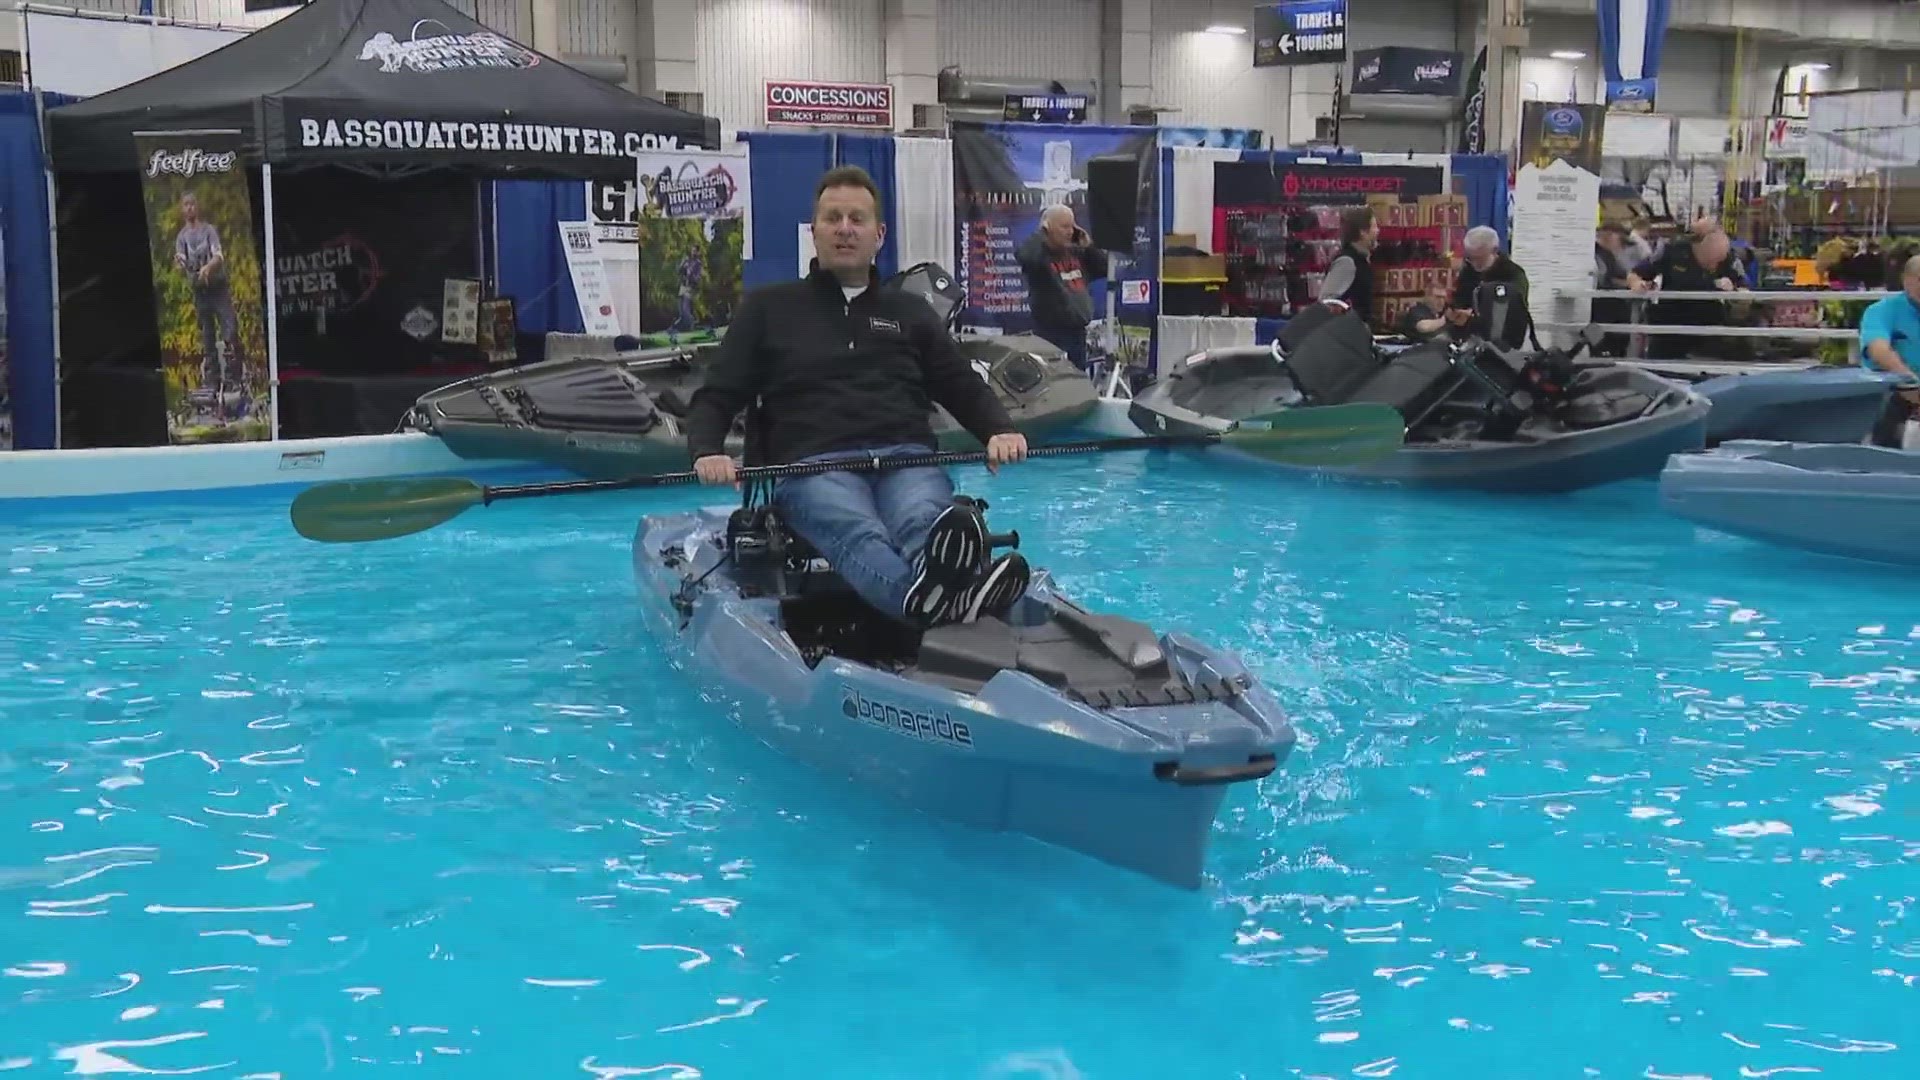 13Sports director Dave Calabro visits the Indianapolis Boat, Sport and Travel Show at the Indiana State Fairgrounds hoping to find some Good News!